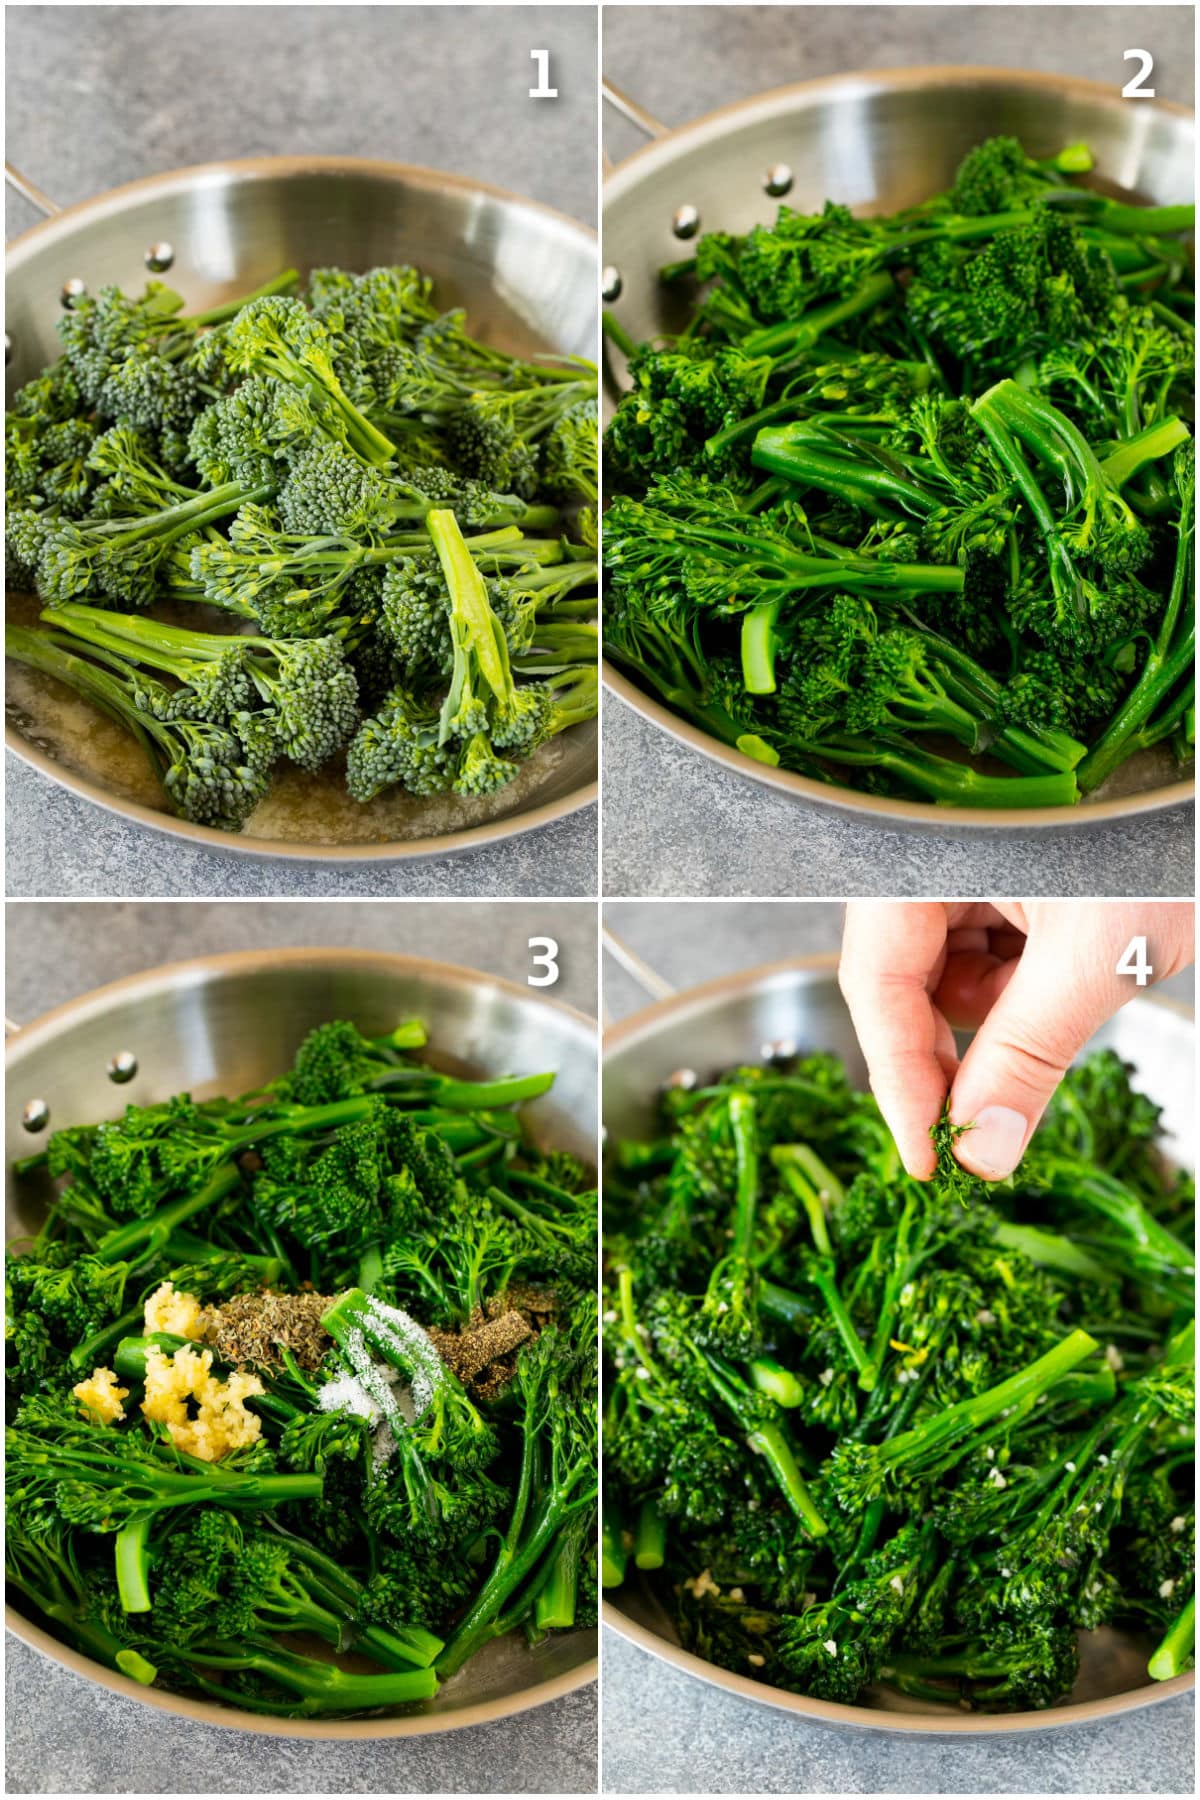 Step by step process shots showing how to saute broccolini.